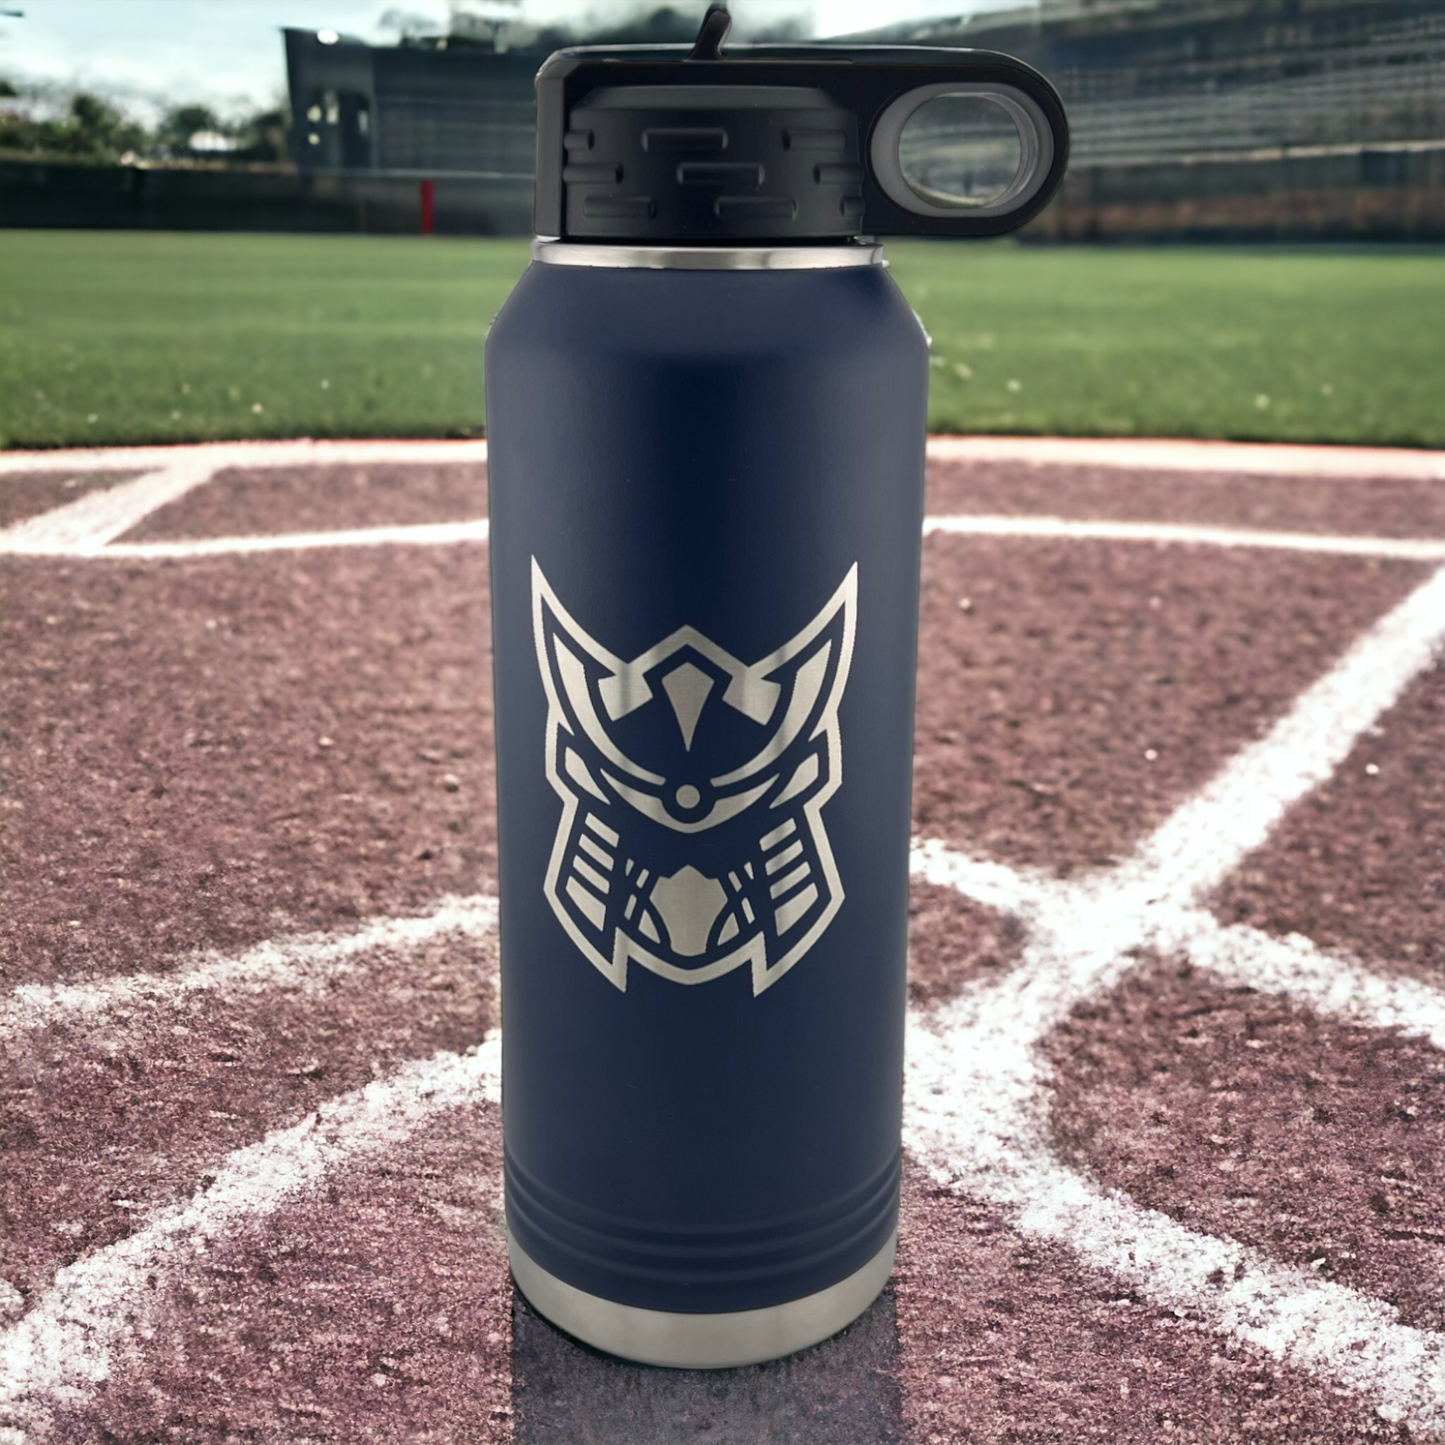 Insulated 32 oz. Water Bottle With Your Team Logo Engraved.  QUANTITY DISCOUNTS AVAILABLE!